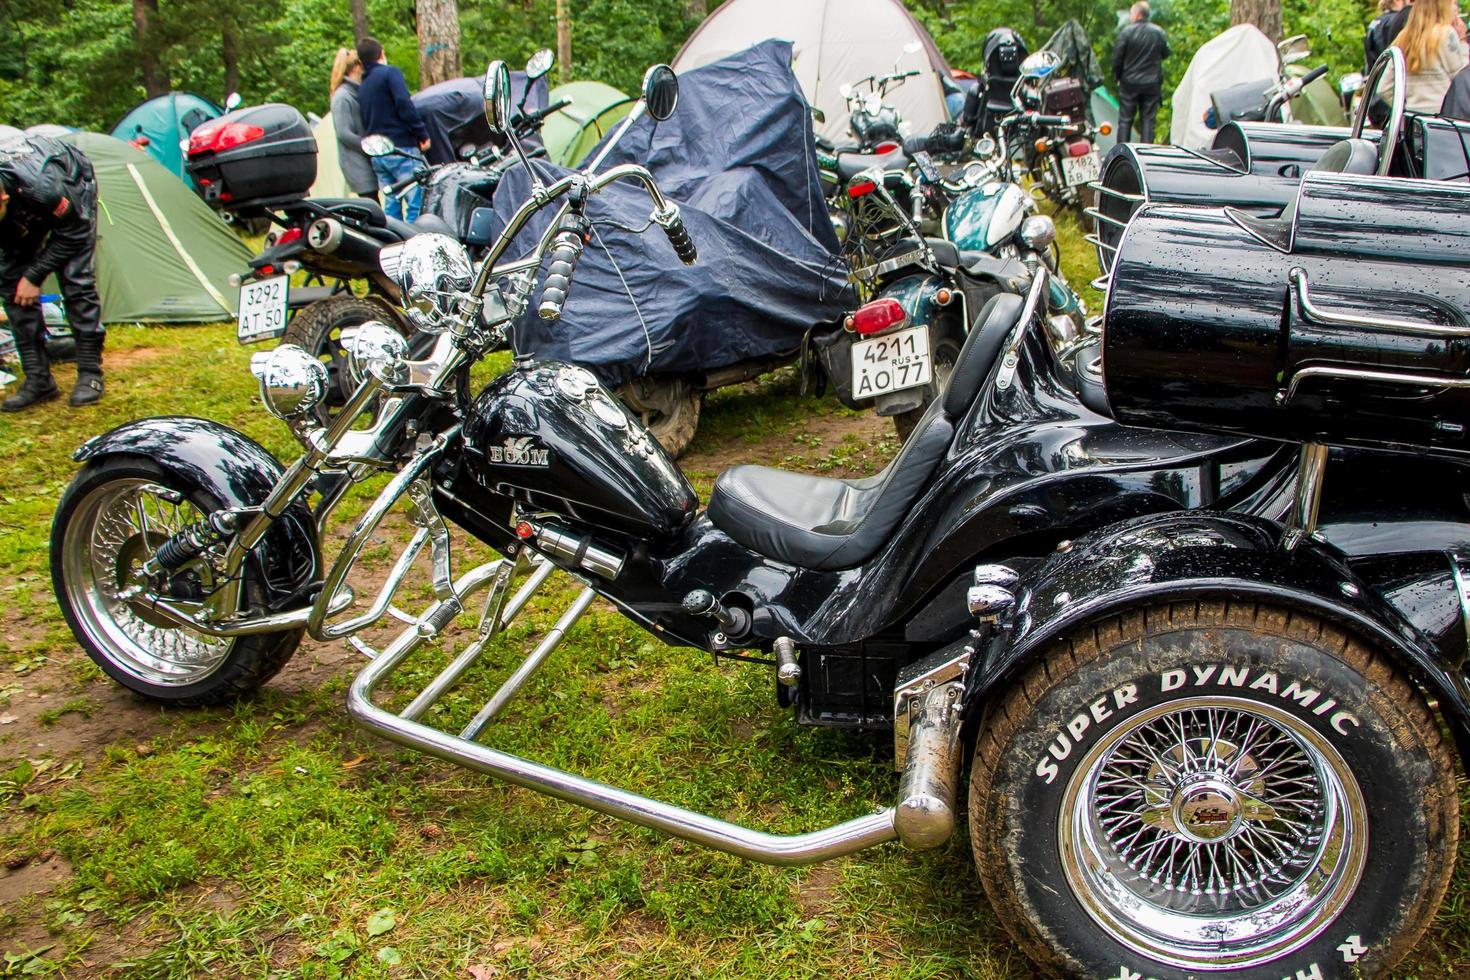 Summer open-air motorcycle festival, motorcycles on nature background, moto camping - July 8, 2015, Russia, Tver. photo